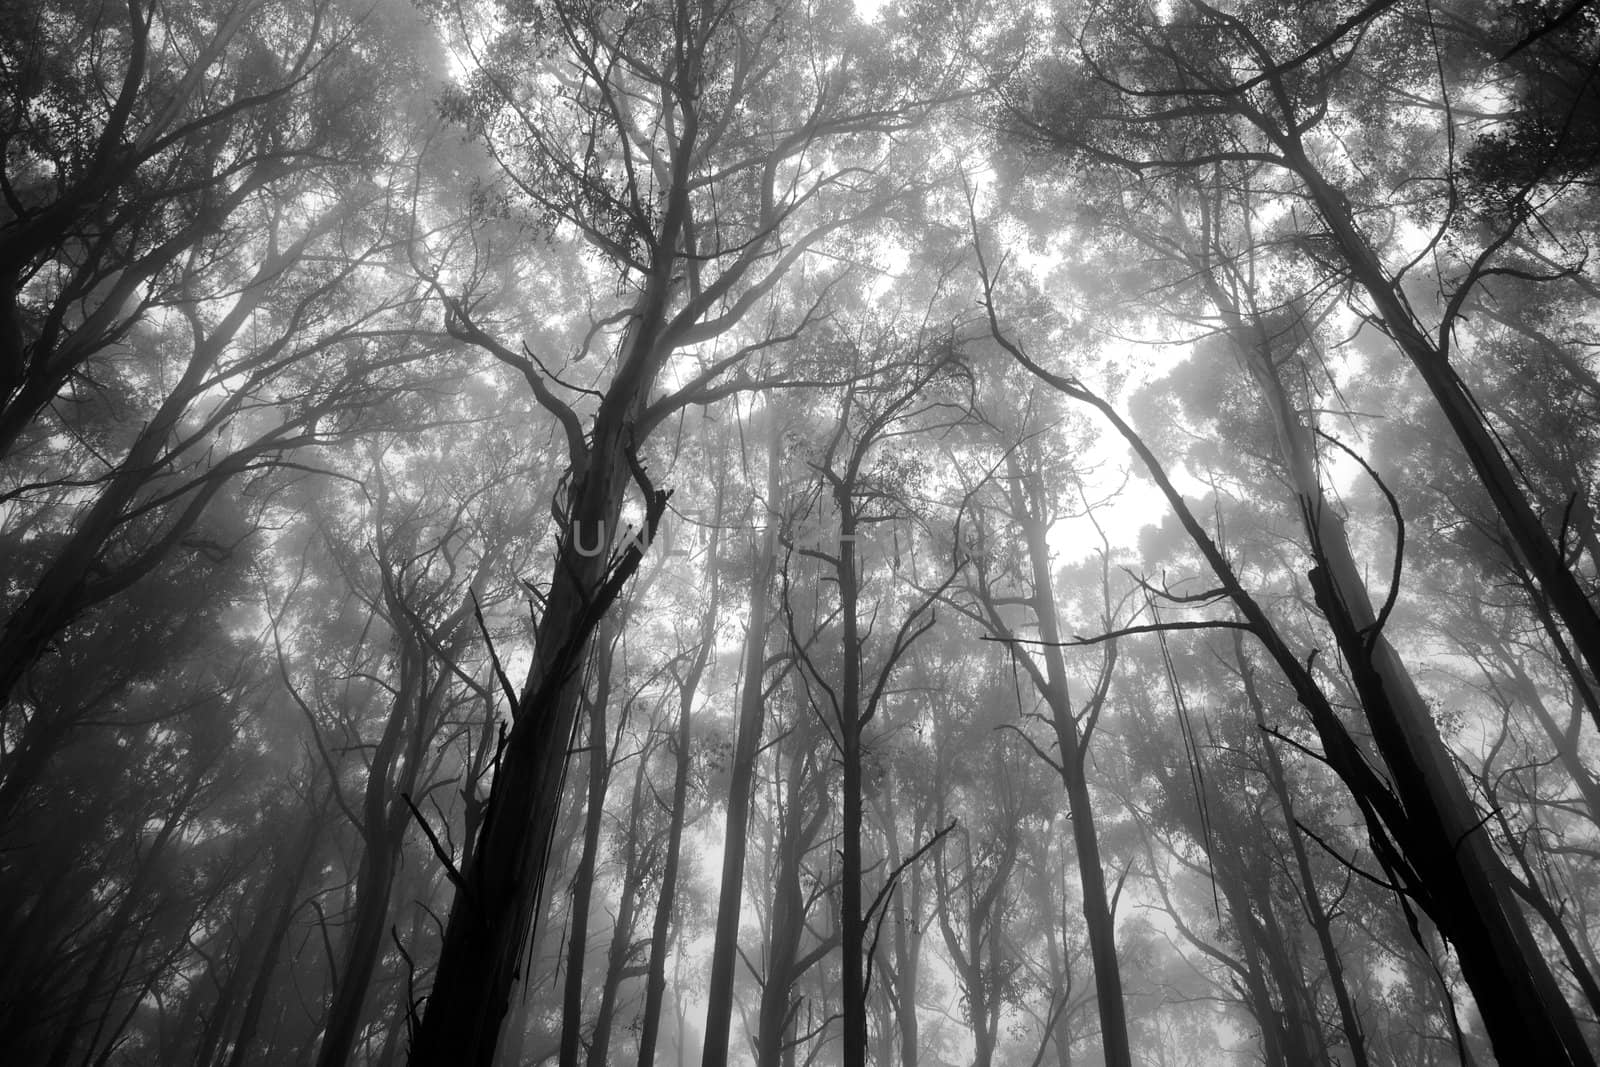 Forrest, Tree tops in the mist by instinia